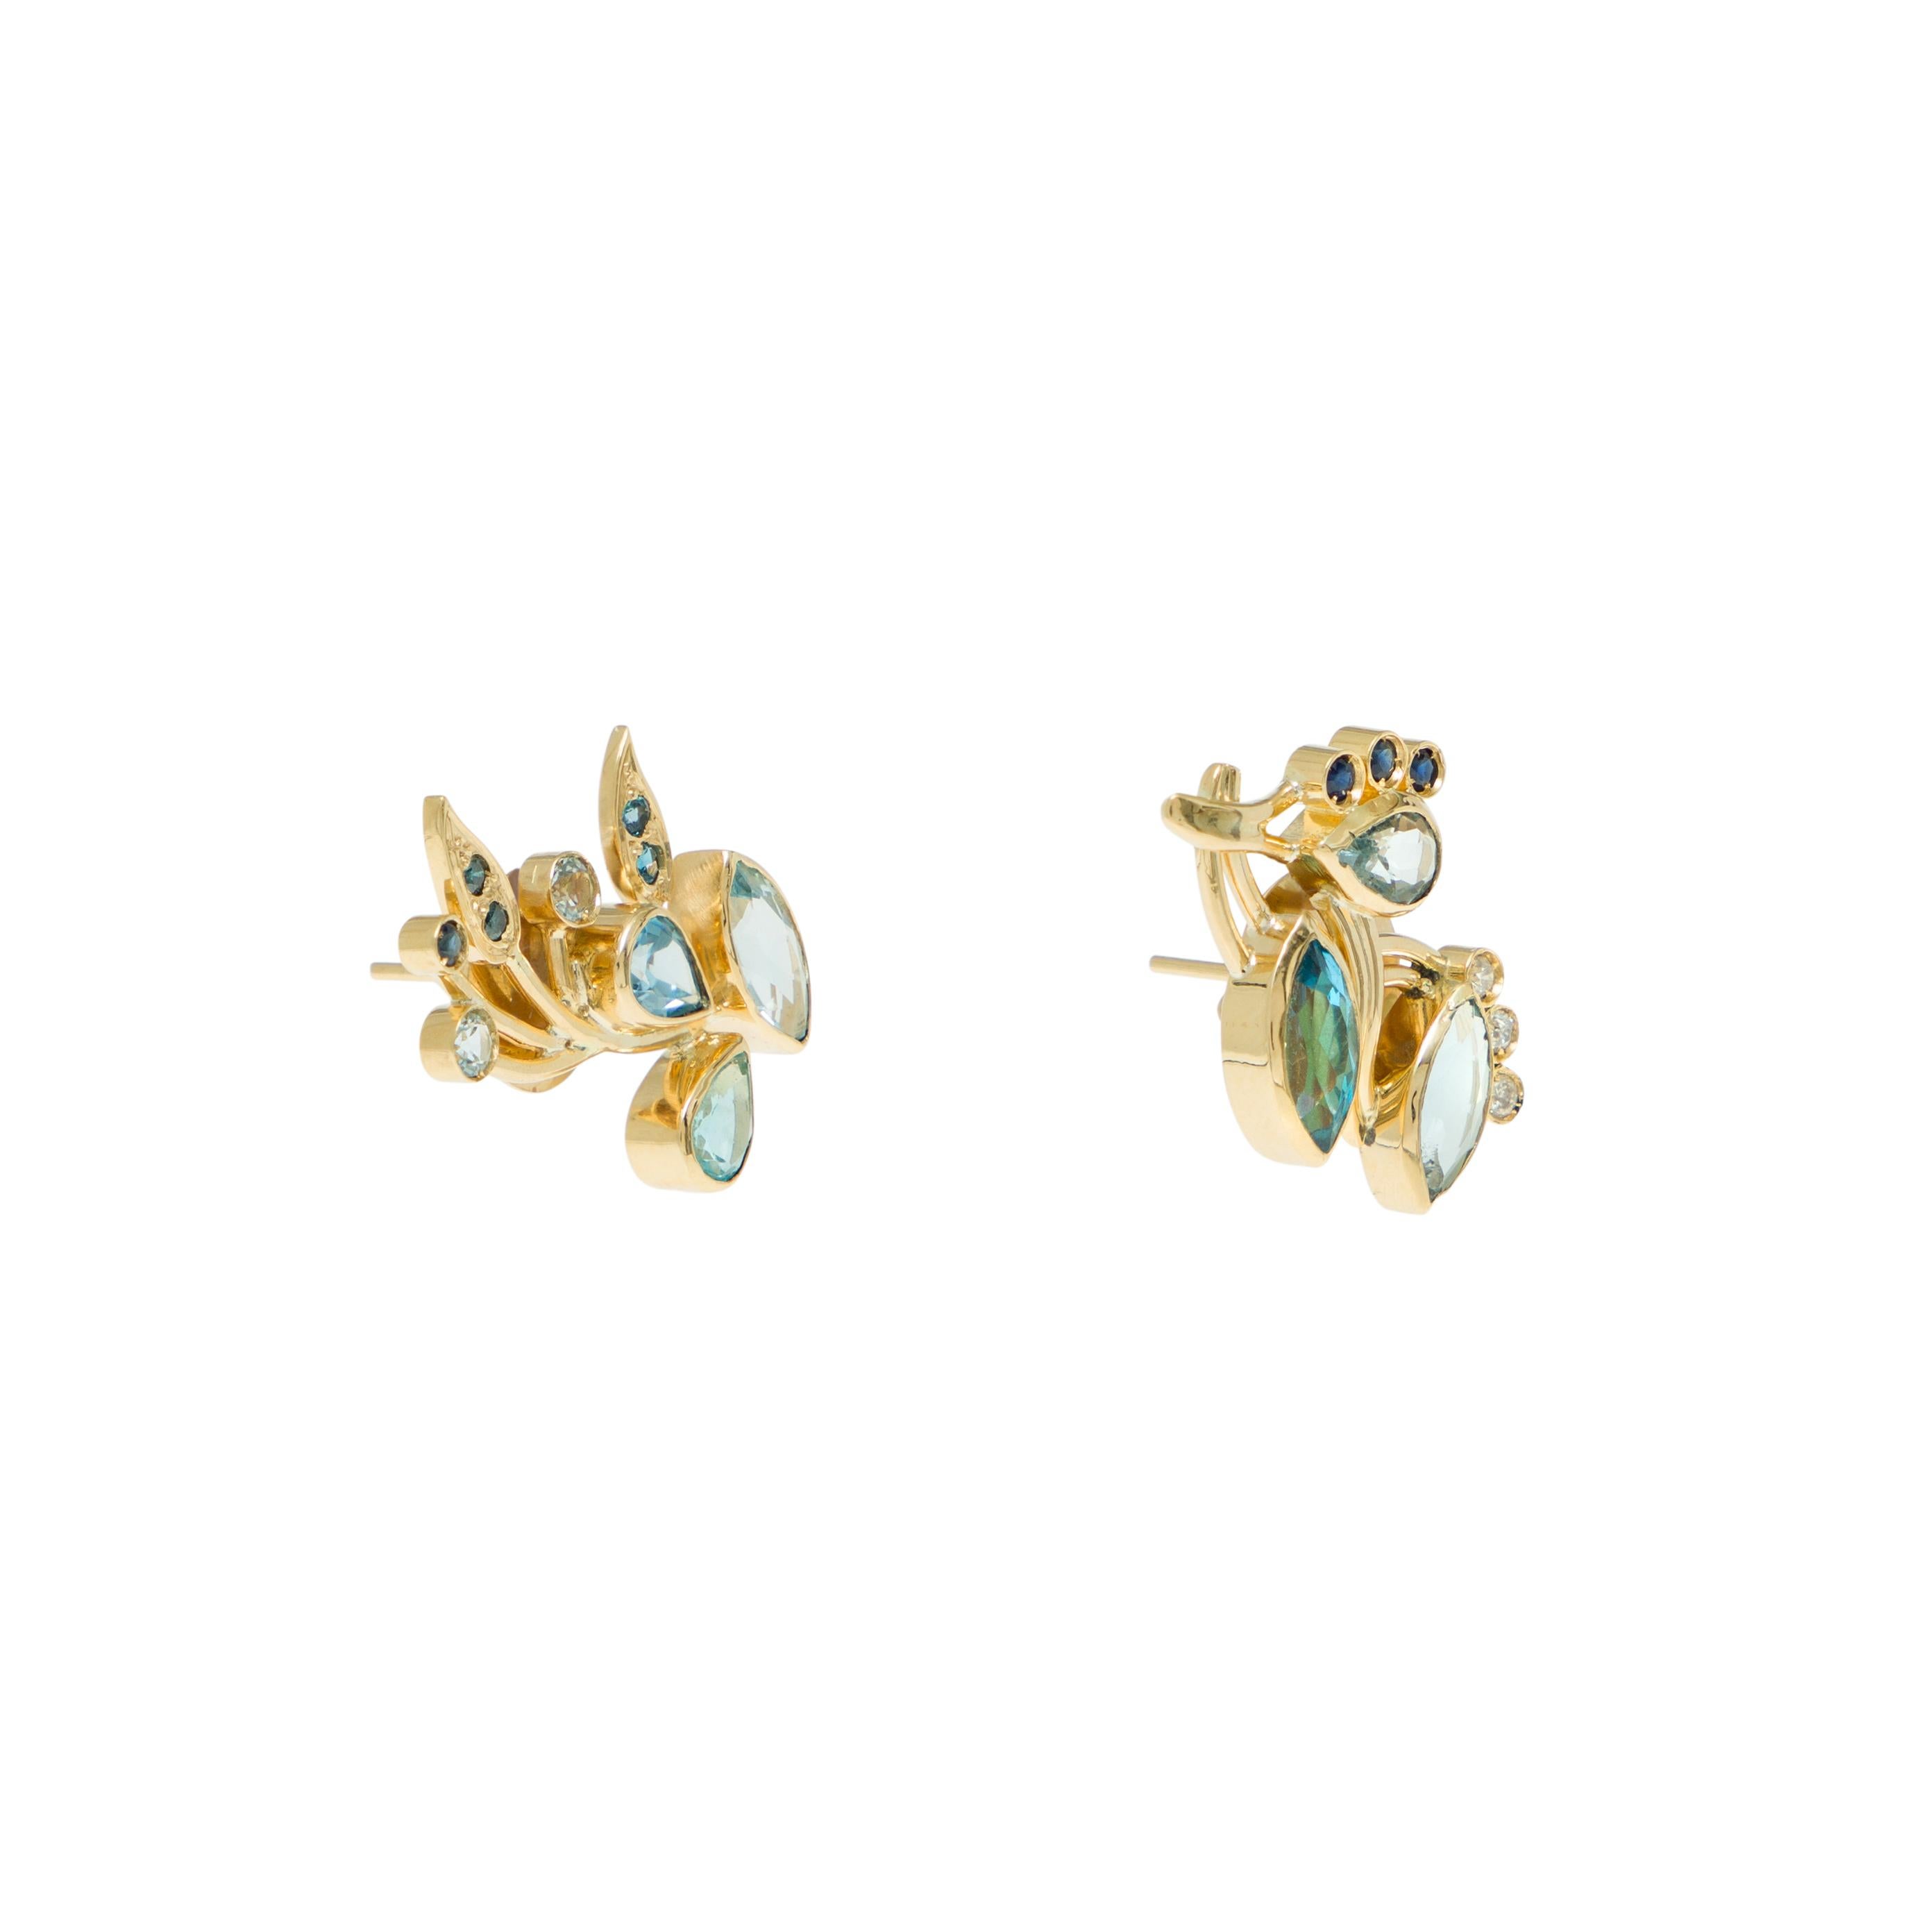 Earrings
Gold 18K
White and Blue Diamonds, Blue Sapphires, Apatites, Blue Topazes (London, Swiss and Sky)
Handmade, polished finish and bezel setting

When first painted, the shades of purple and pink were very dominant in Van Gogh’s “Vase with